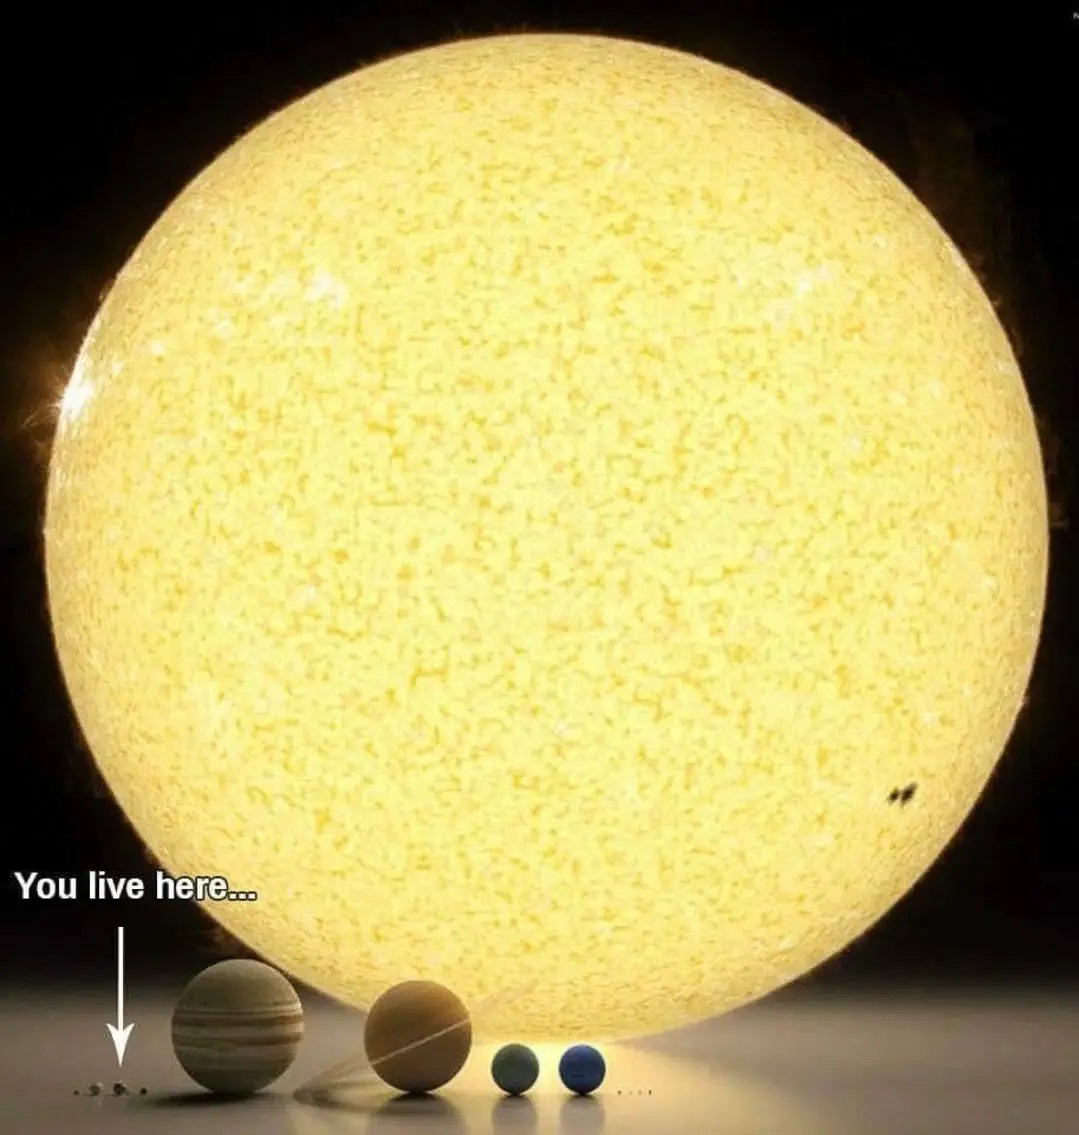 Earth in perspective - I AM HERE  ~~  